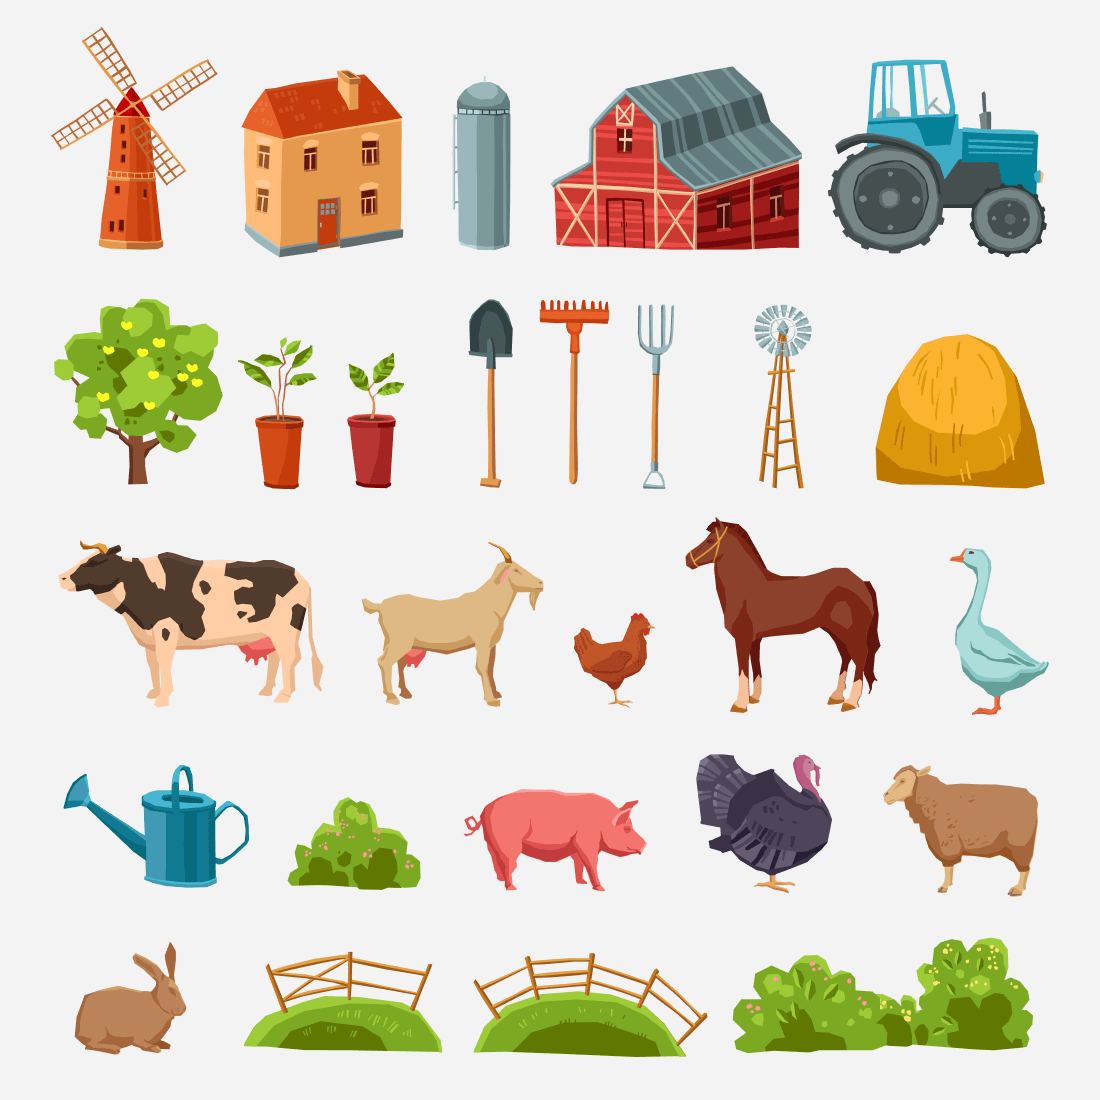 Mill, Barns, Plants, Animals and Agricultural Machinery.